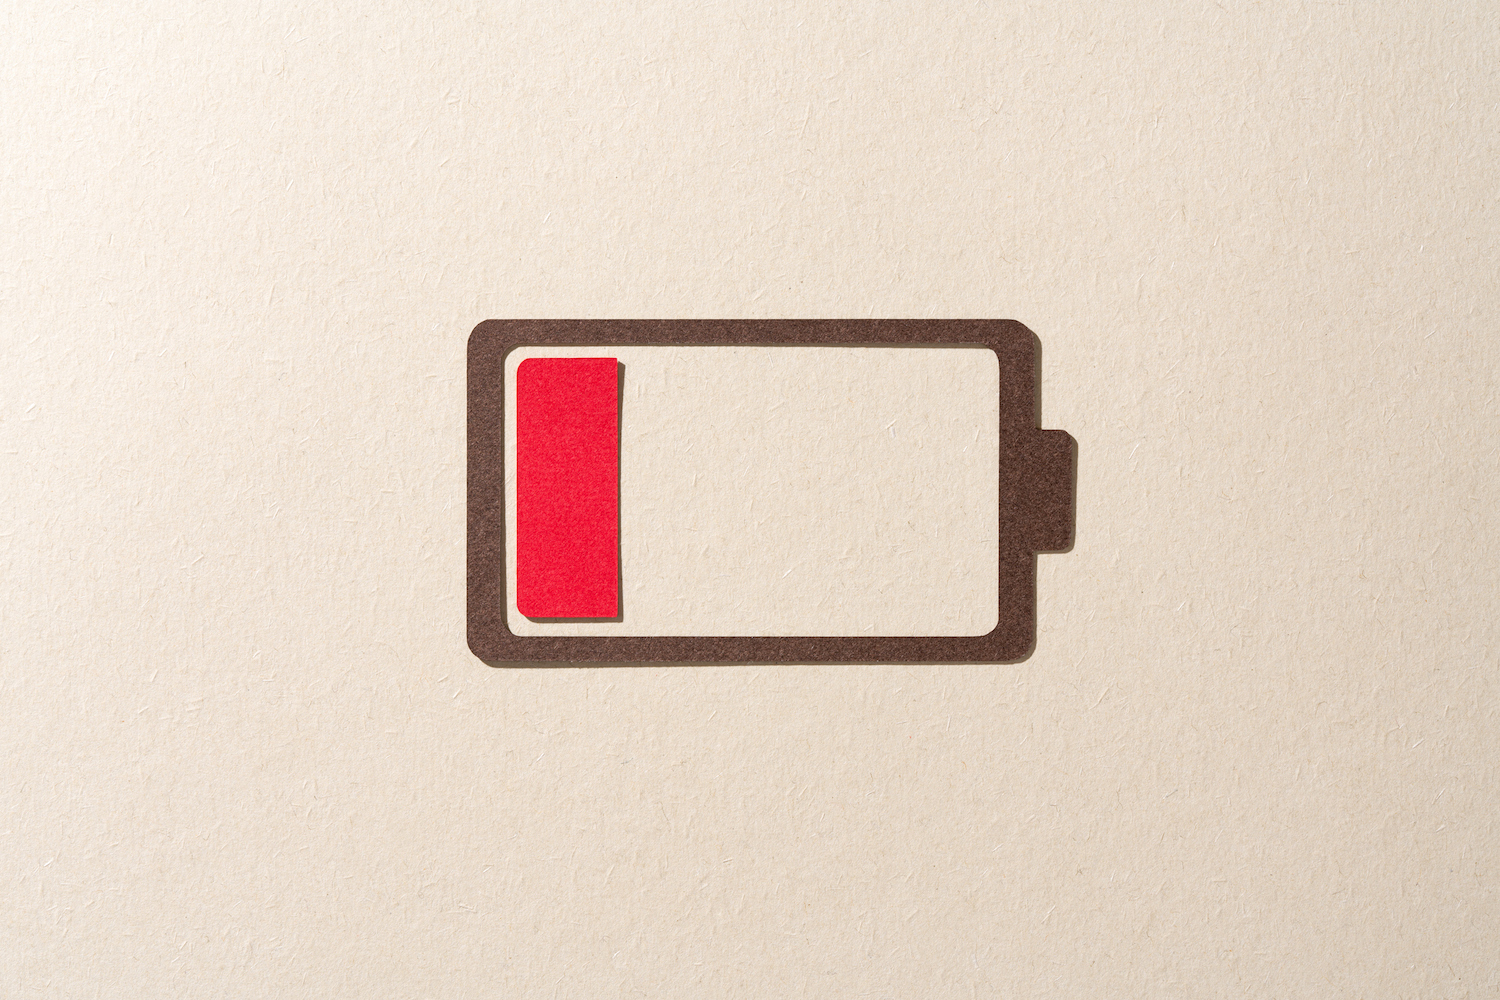 Paper Cut Craft Battery Only Has One Red Cell Left on Beige Background Directly Above View.